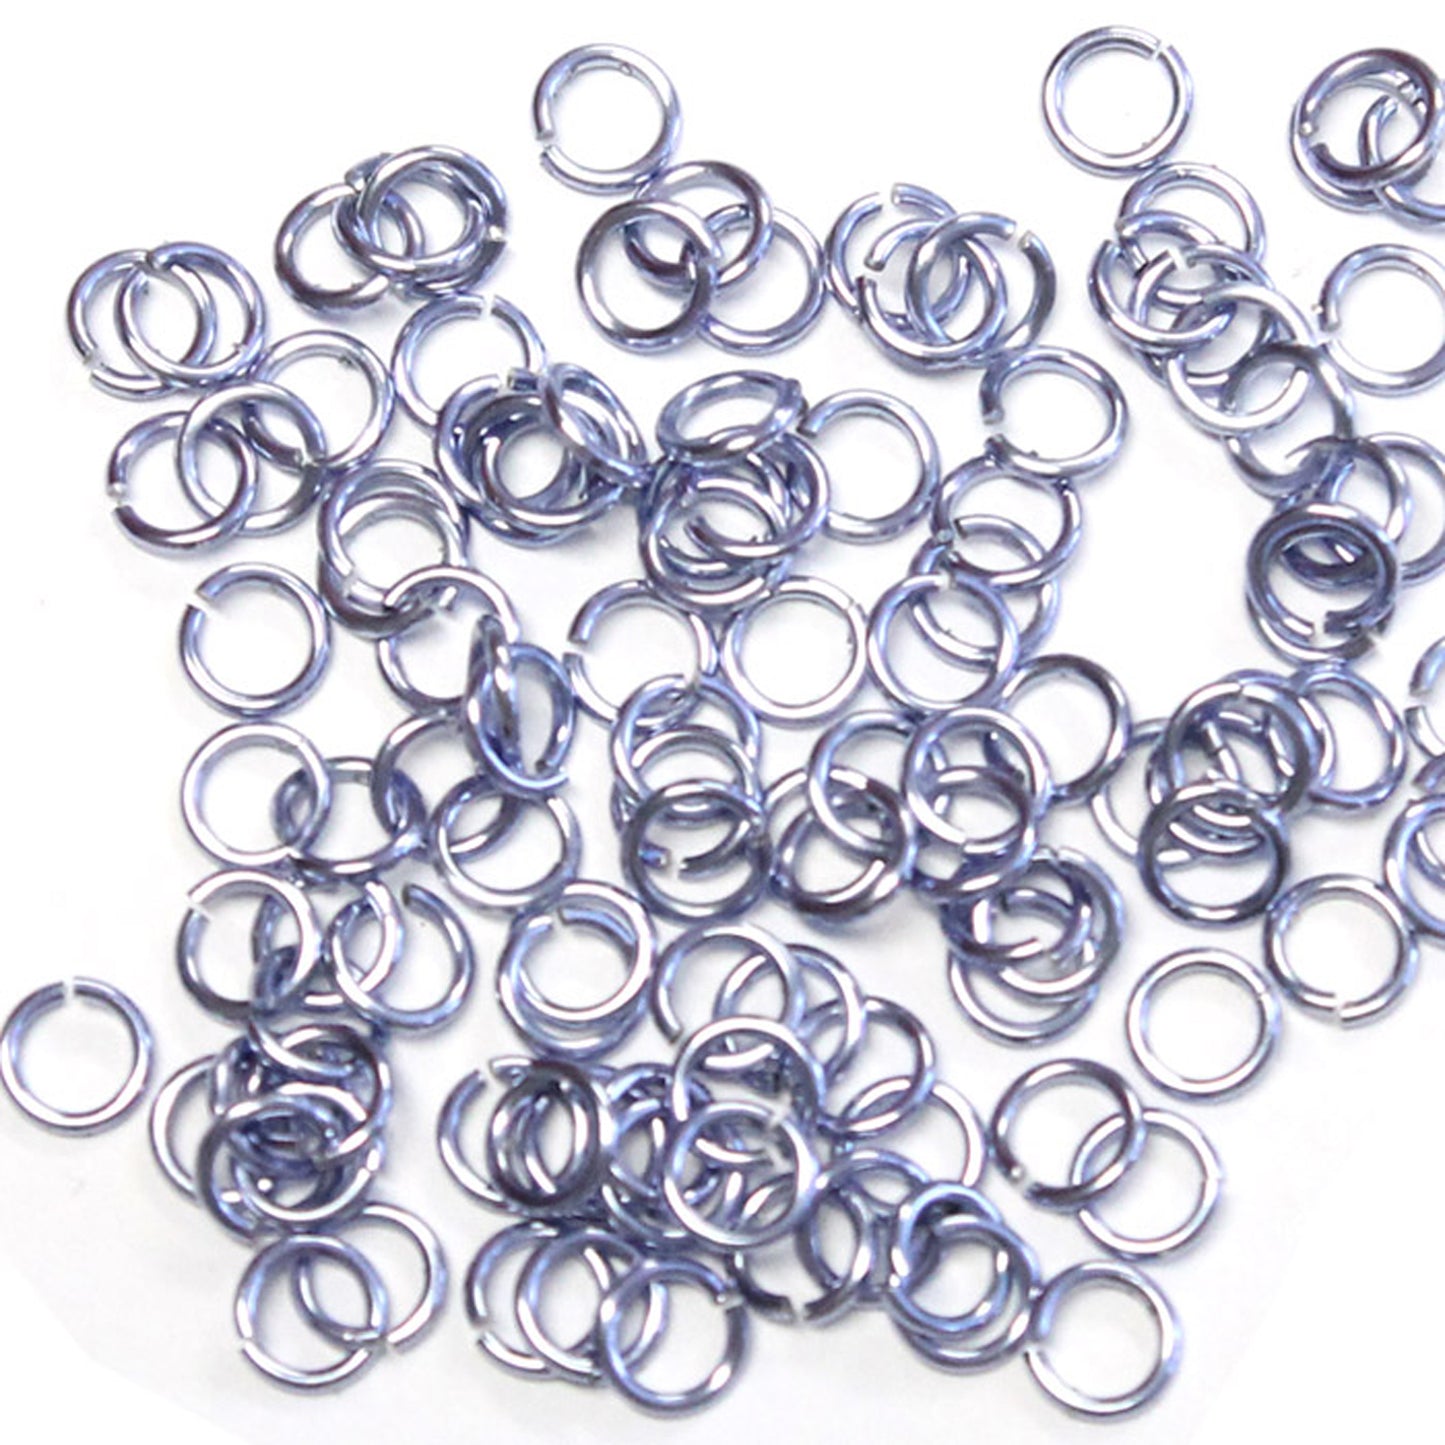 SHINY LIGHT LAVENDER 3.4mm 20 GA Jump Rings / 5 Gram Pack (approx 275) / sawcut round open anodized aluminum